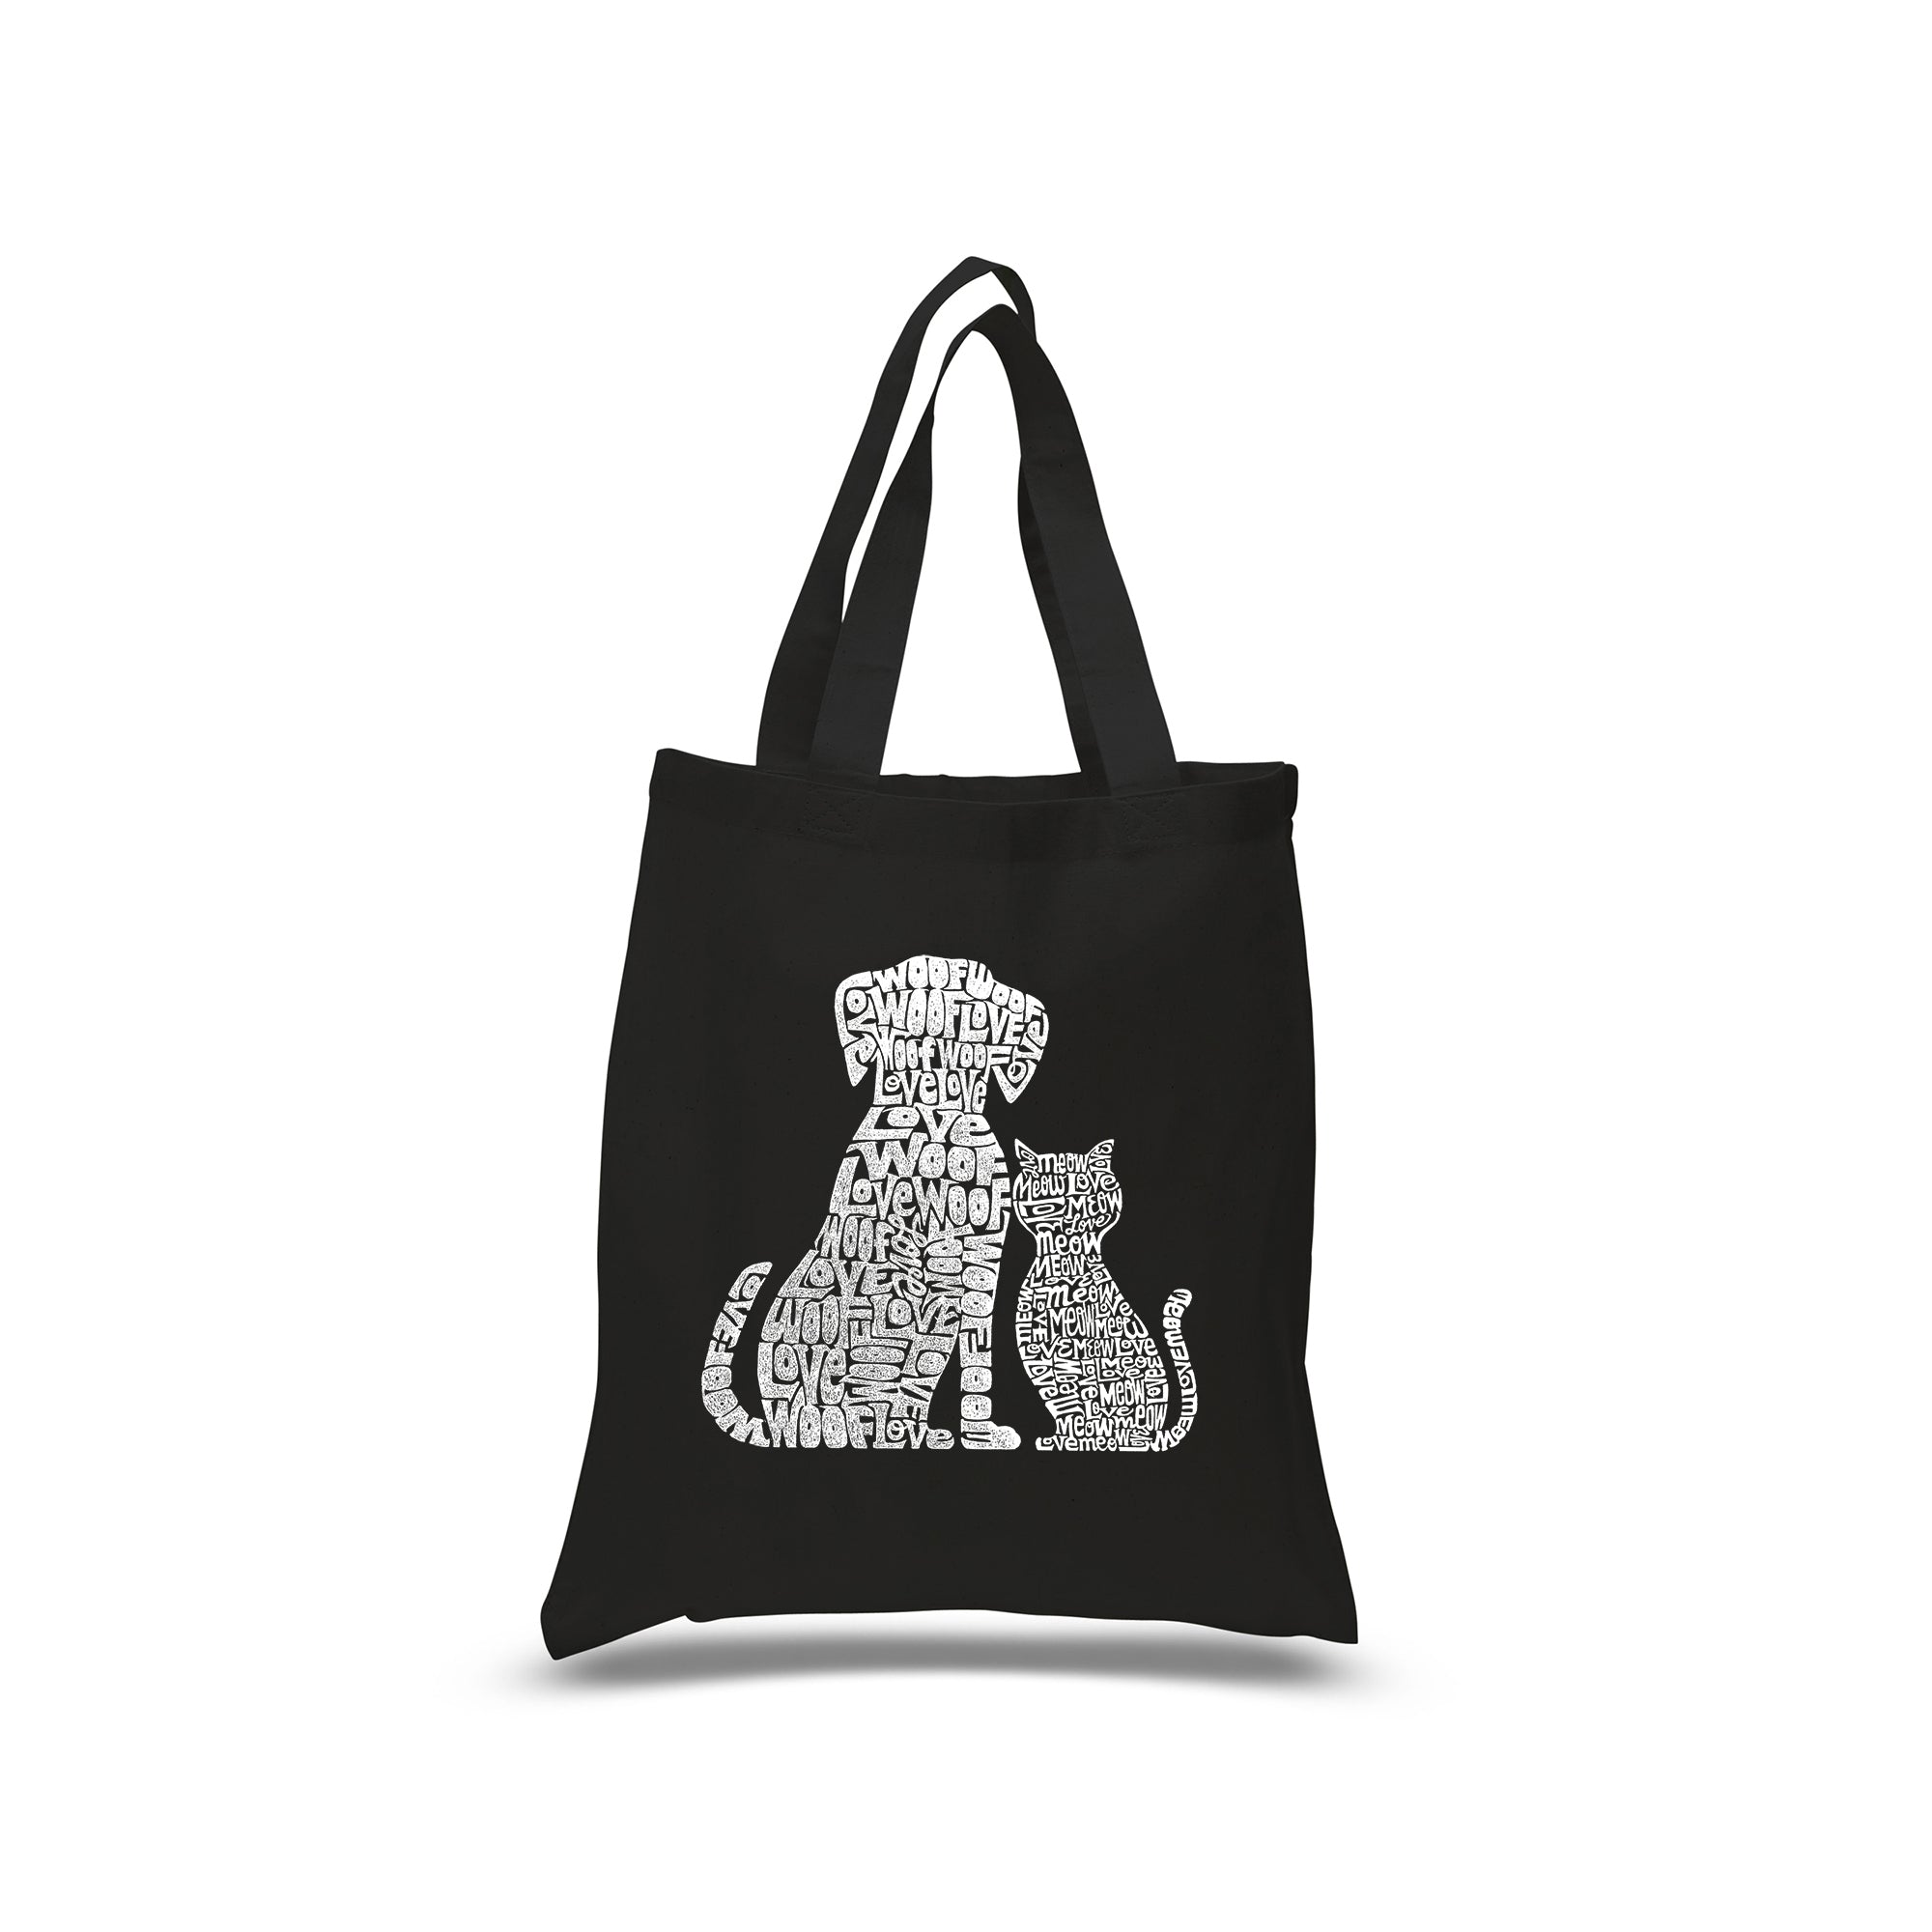 Small Word Art Tote Bag - Dogs And Cats - Navy - Small